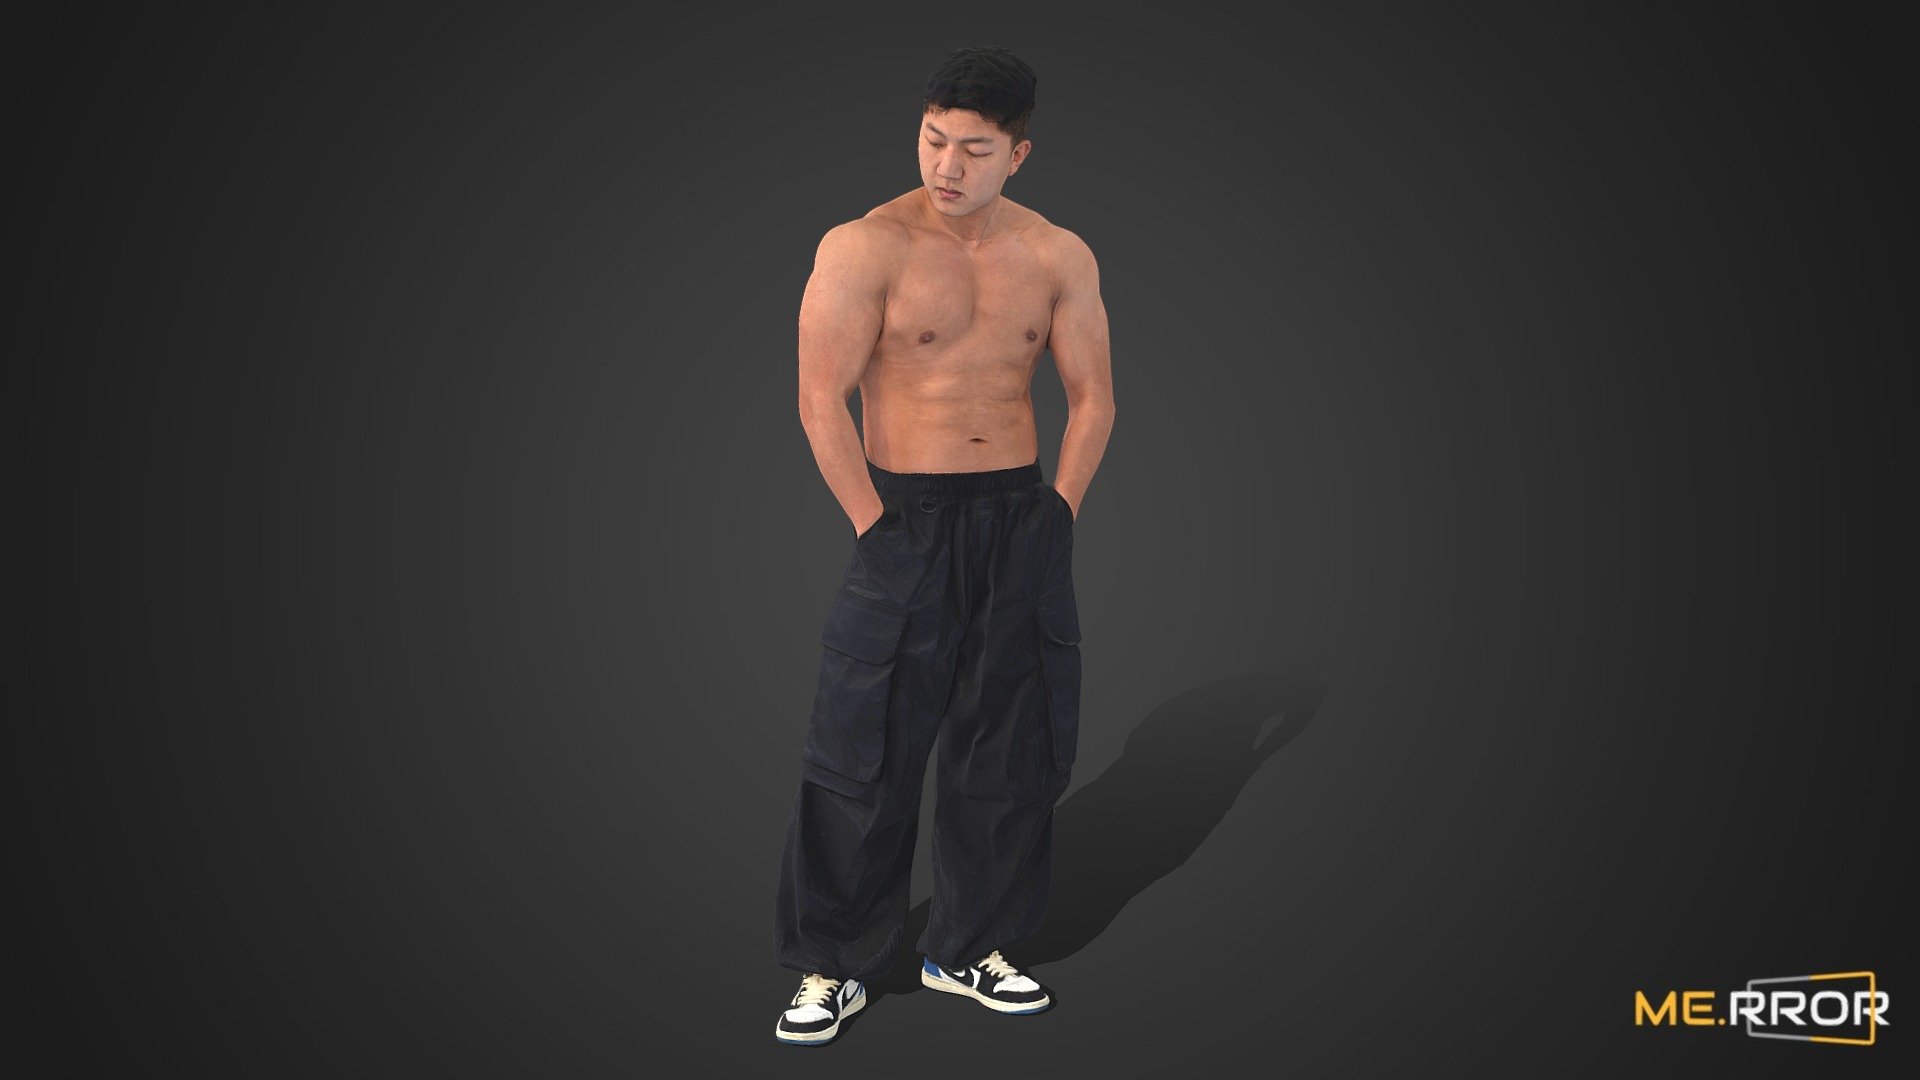 ME.RROR


From 3D models of Asian individuals to a fresh selection of free assets available each month - explore a richer diversity of photorealistic 3D assets at the ME.RROR asset store!

https://me-rror.com/store




[Model Info]




Model Formats : FBX, MAX

Texture Maps (8K) : Diffuse

You can buy this model at https://me-rror.com/asset/human/asset610




Find Scanned - 2M poly version here: https://sketchfab.com/3d-models/0ff7271913f644a59250fb58fac8d904

Find the topologized version here : https://sketchfab.com/3d-models/232a8d7ca827439c98a1c4a592c7b973

If you encounter any problems using this model, please feel free to contact us. We'd be glad to help you.



[About ME.RROR]

Step into the future with ME.RROR, South Korea's leading 3D specialist. Bespoke creations are not just possible; they are our specialty.

Service areas:




3D scanning

3D modeling

Virtual human creation

Inquiries: https://merror.channel.io/lounge - Asian Man Scan_Posed 100k poly - 3D model by ME.RROR (@merror) 3d model